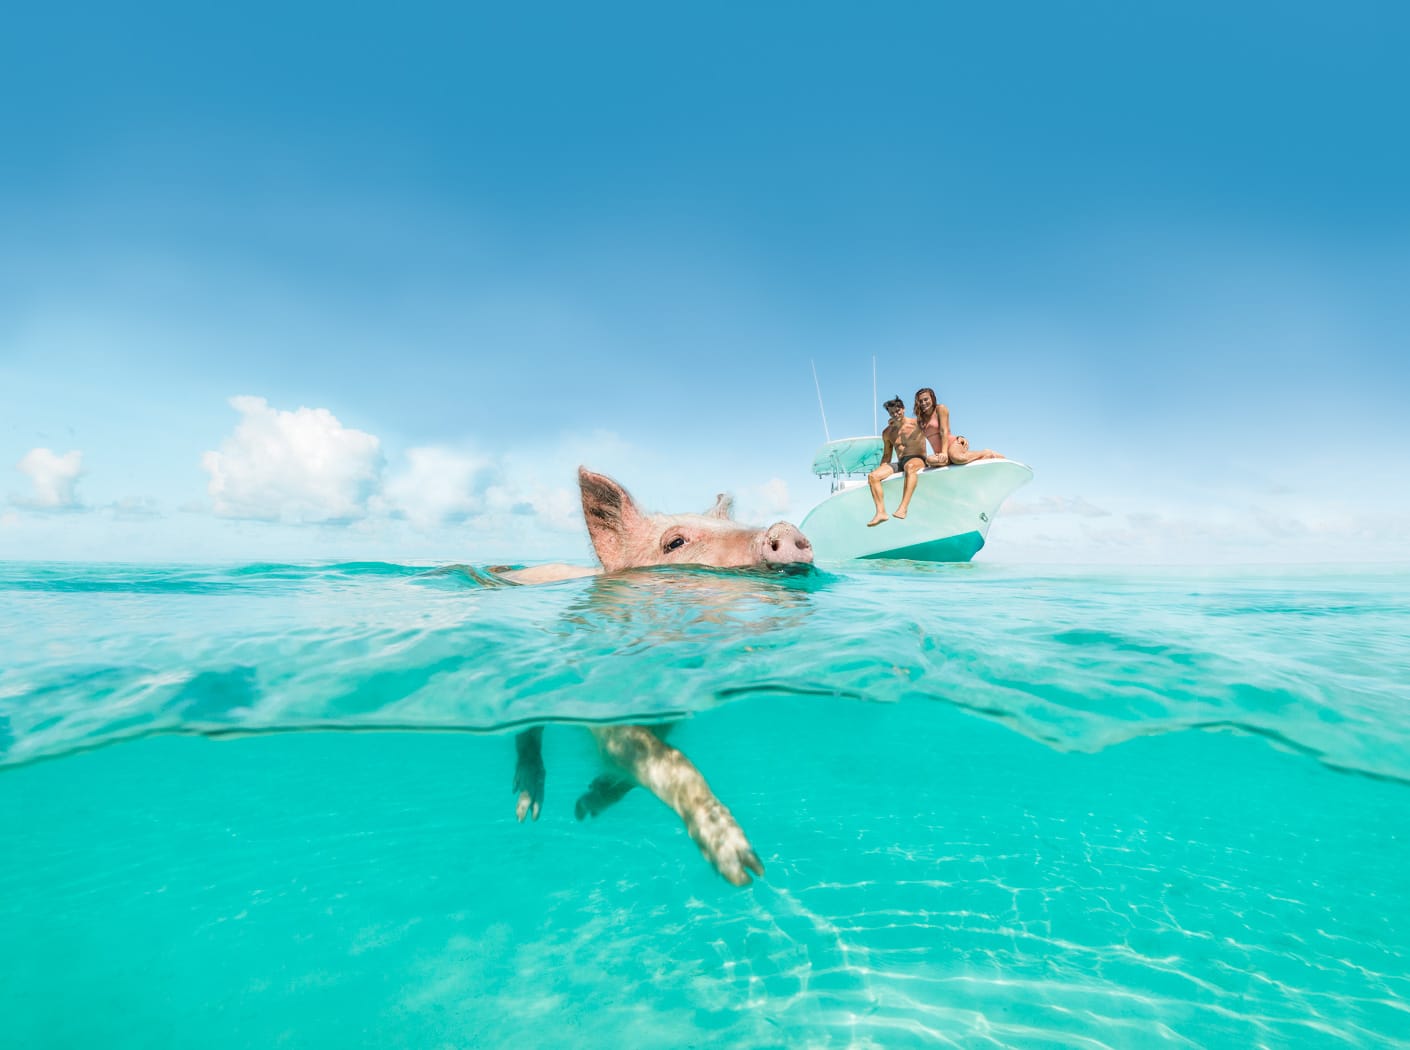 Two women swimming with a pig in the water at Staniel Cay, The Bahamas.